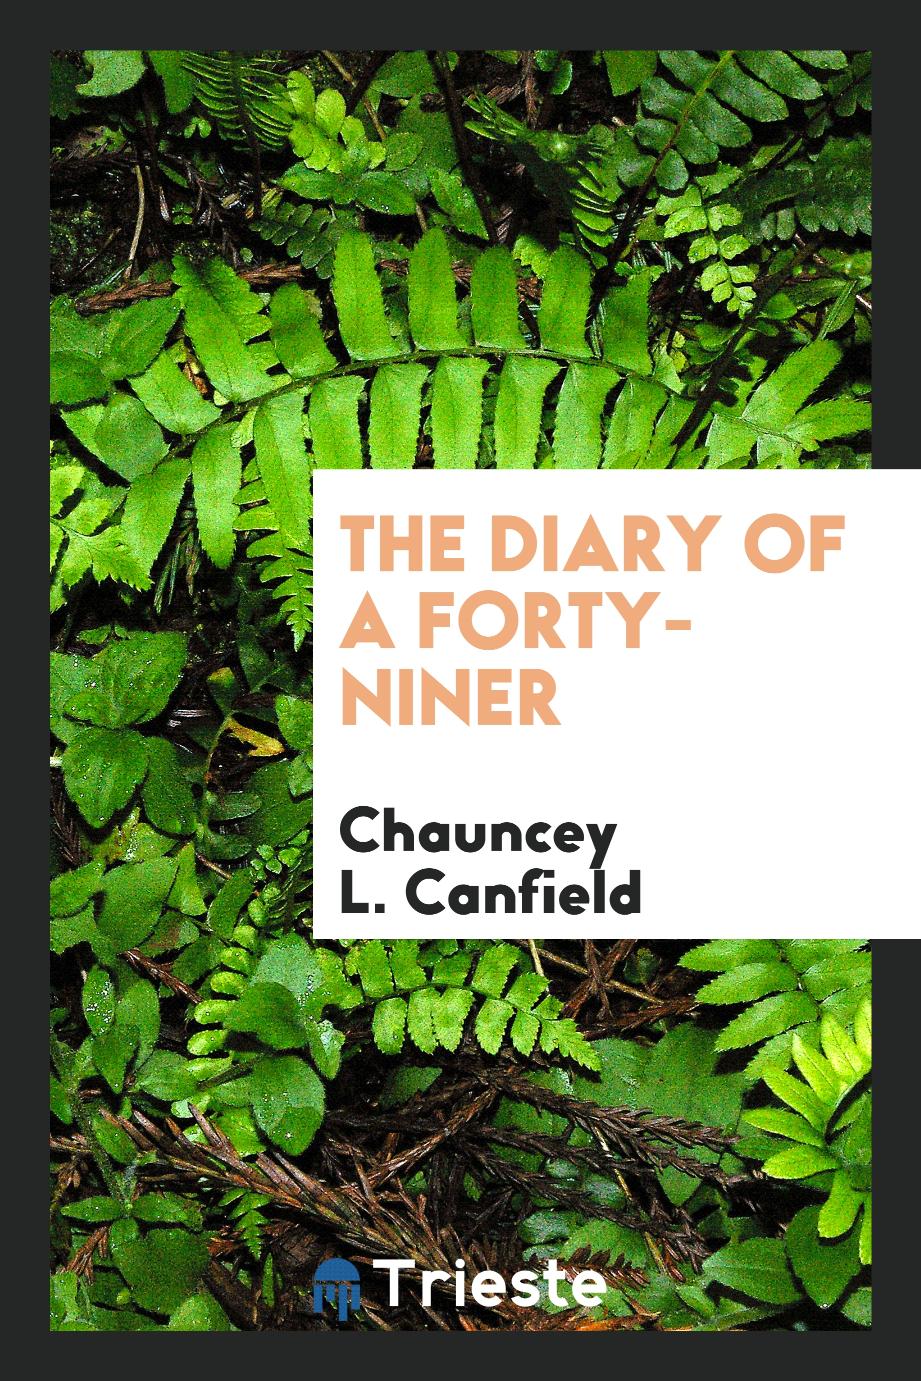 The diary of a forty-niner